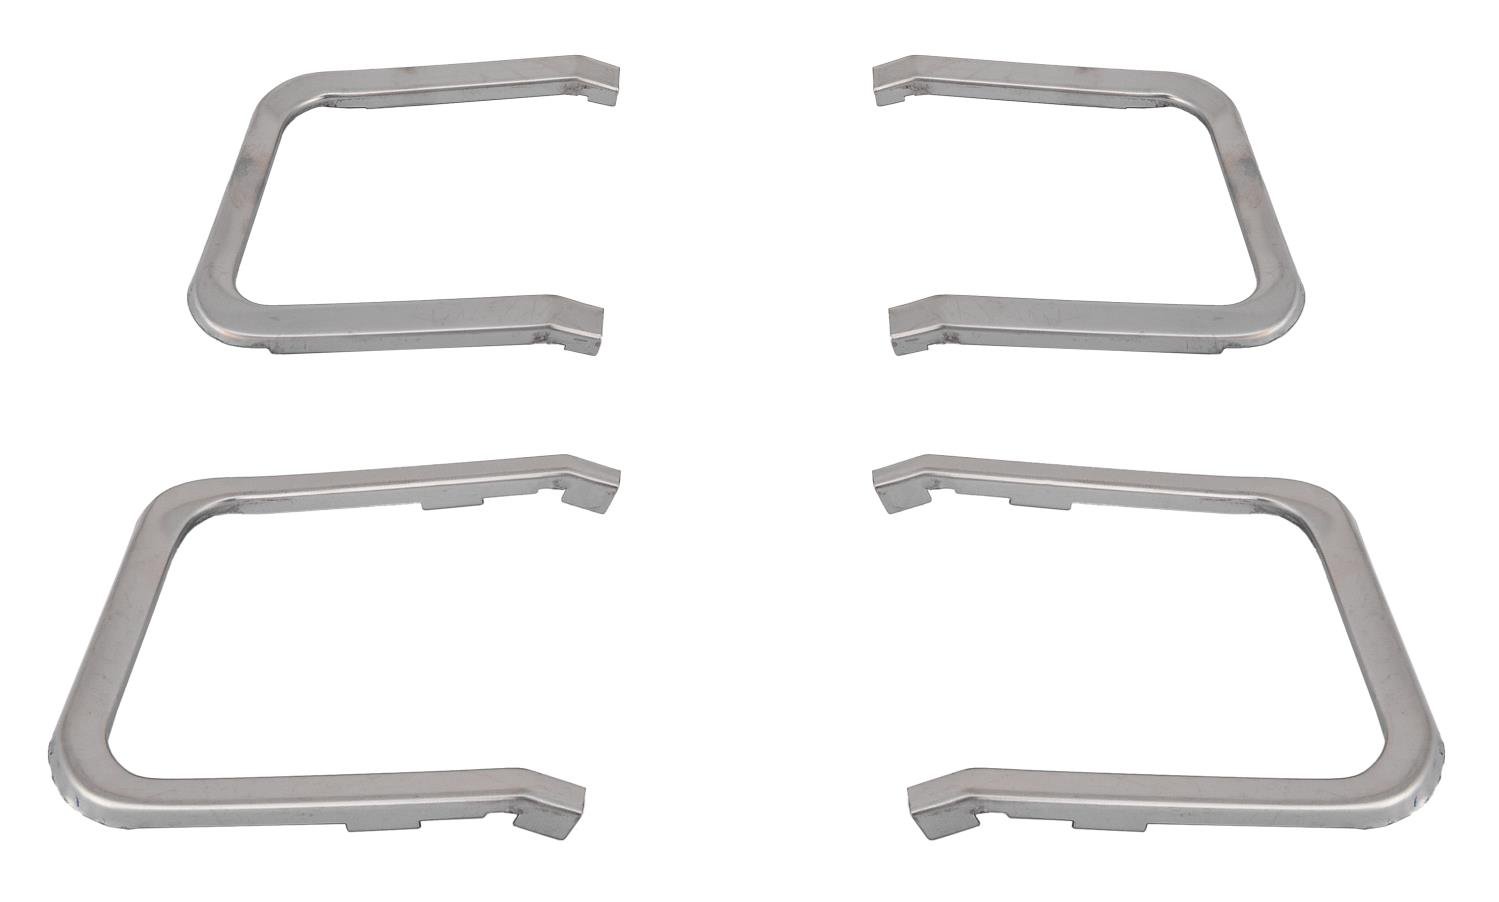 Outer End C Grille Molding Set for 1970 Chevrolet Chevelle, El Camino